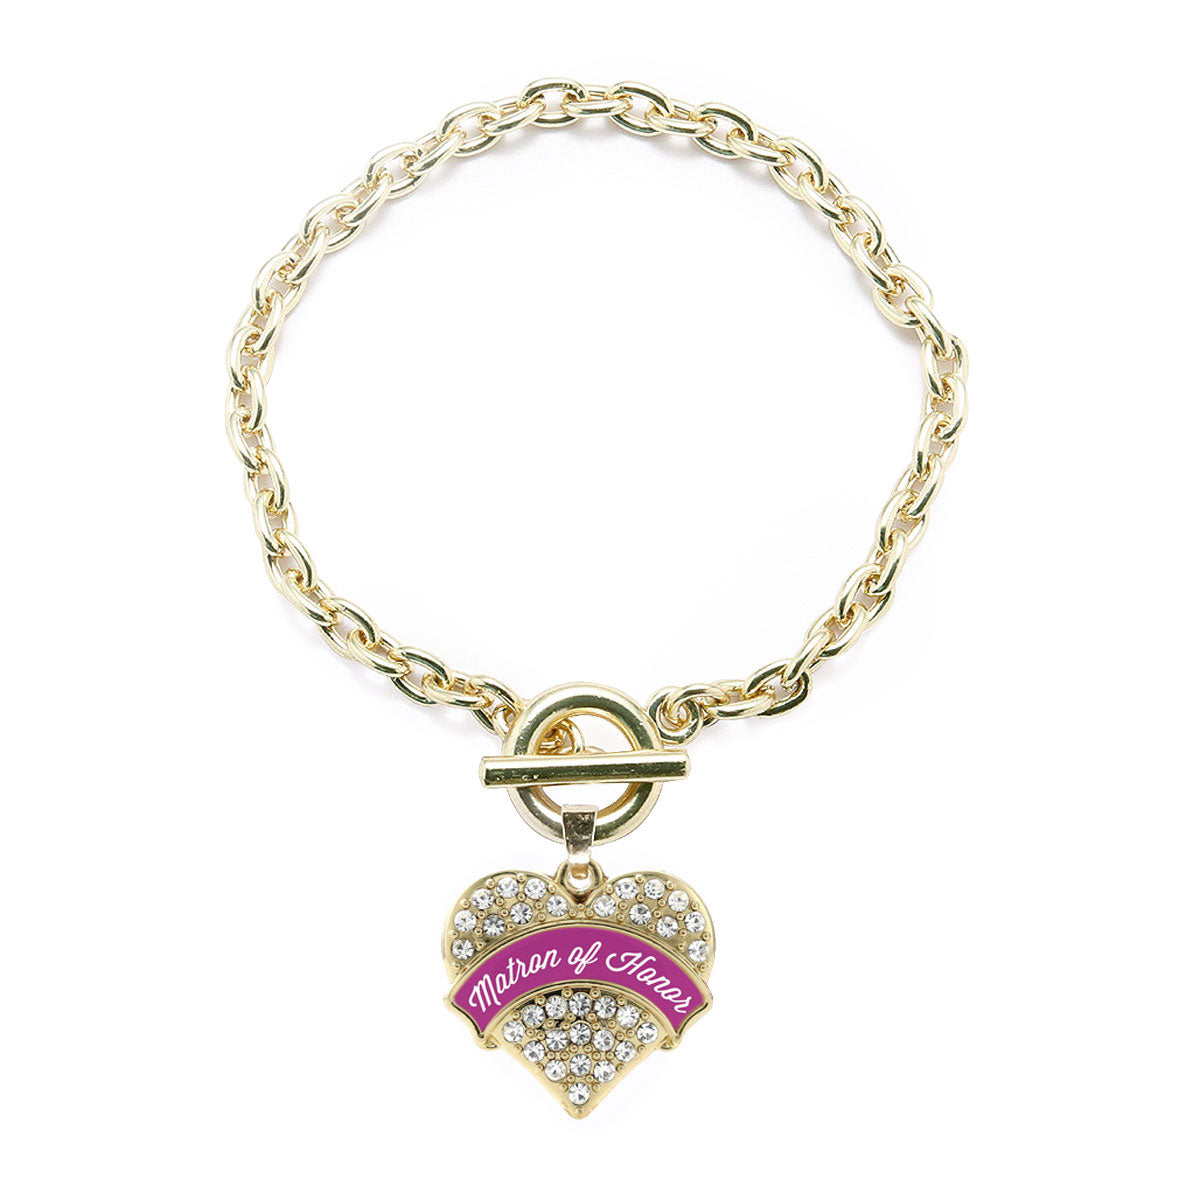 Gold Magenta Matron of Honor Pave Heart Charm Toggle Bracelet